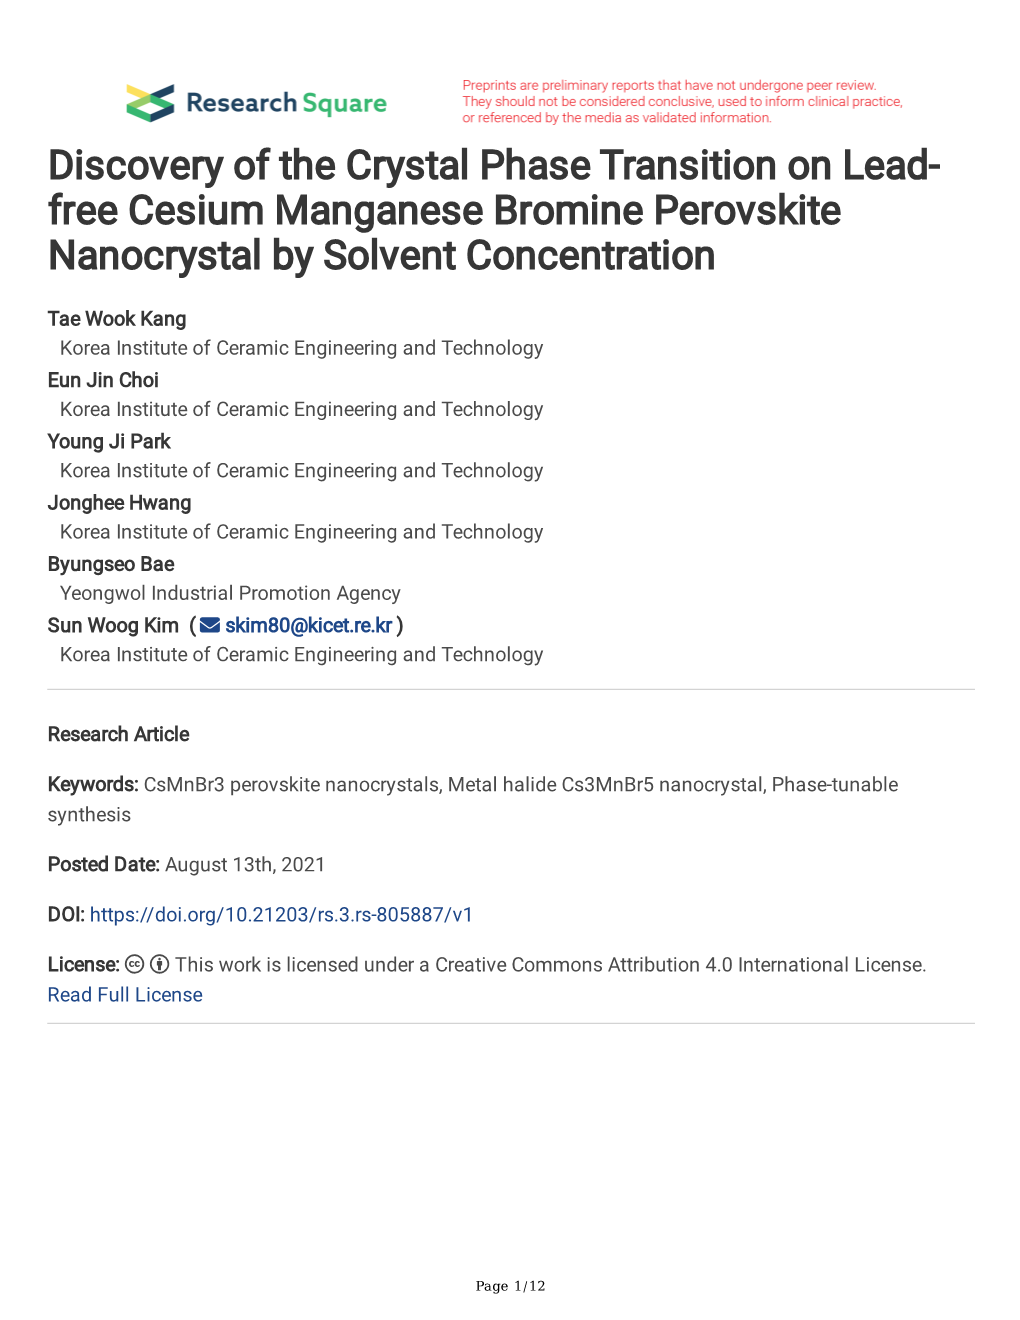 Free Cesium Manganese Bromine Perovskite Nanocrystal by Solvent Concentration